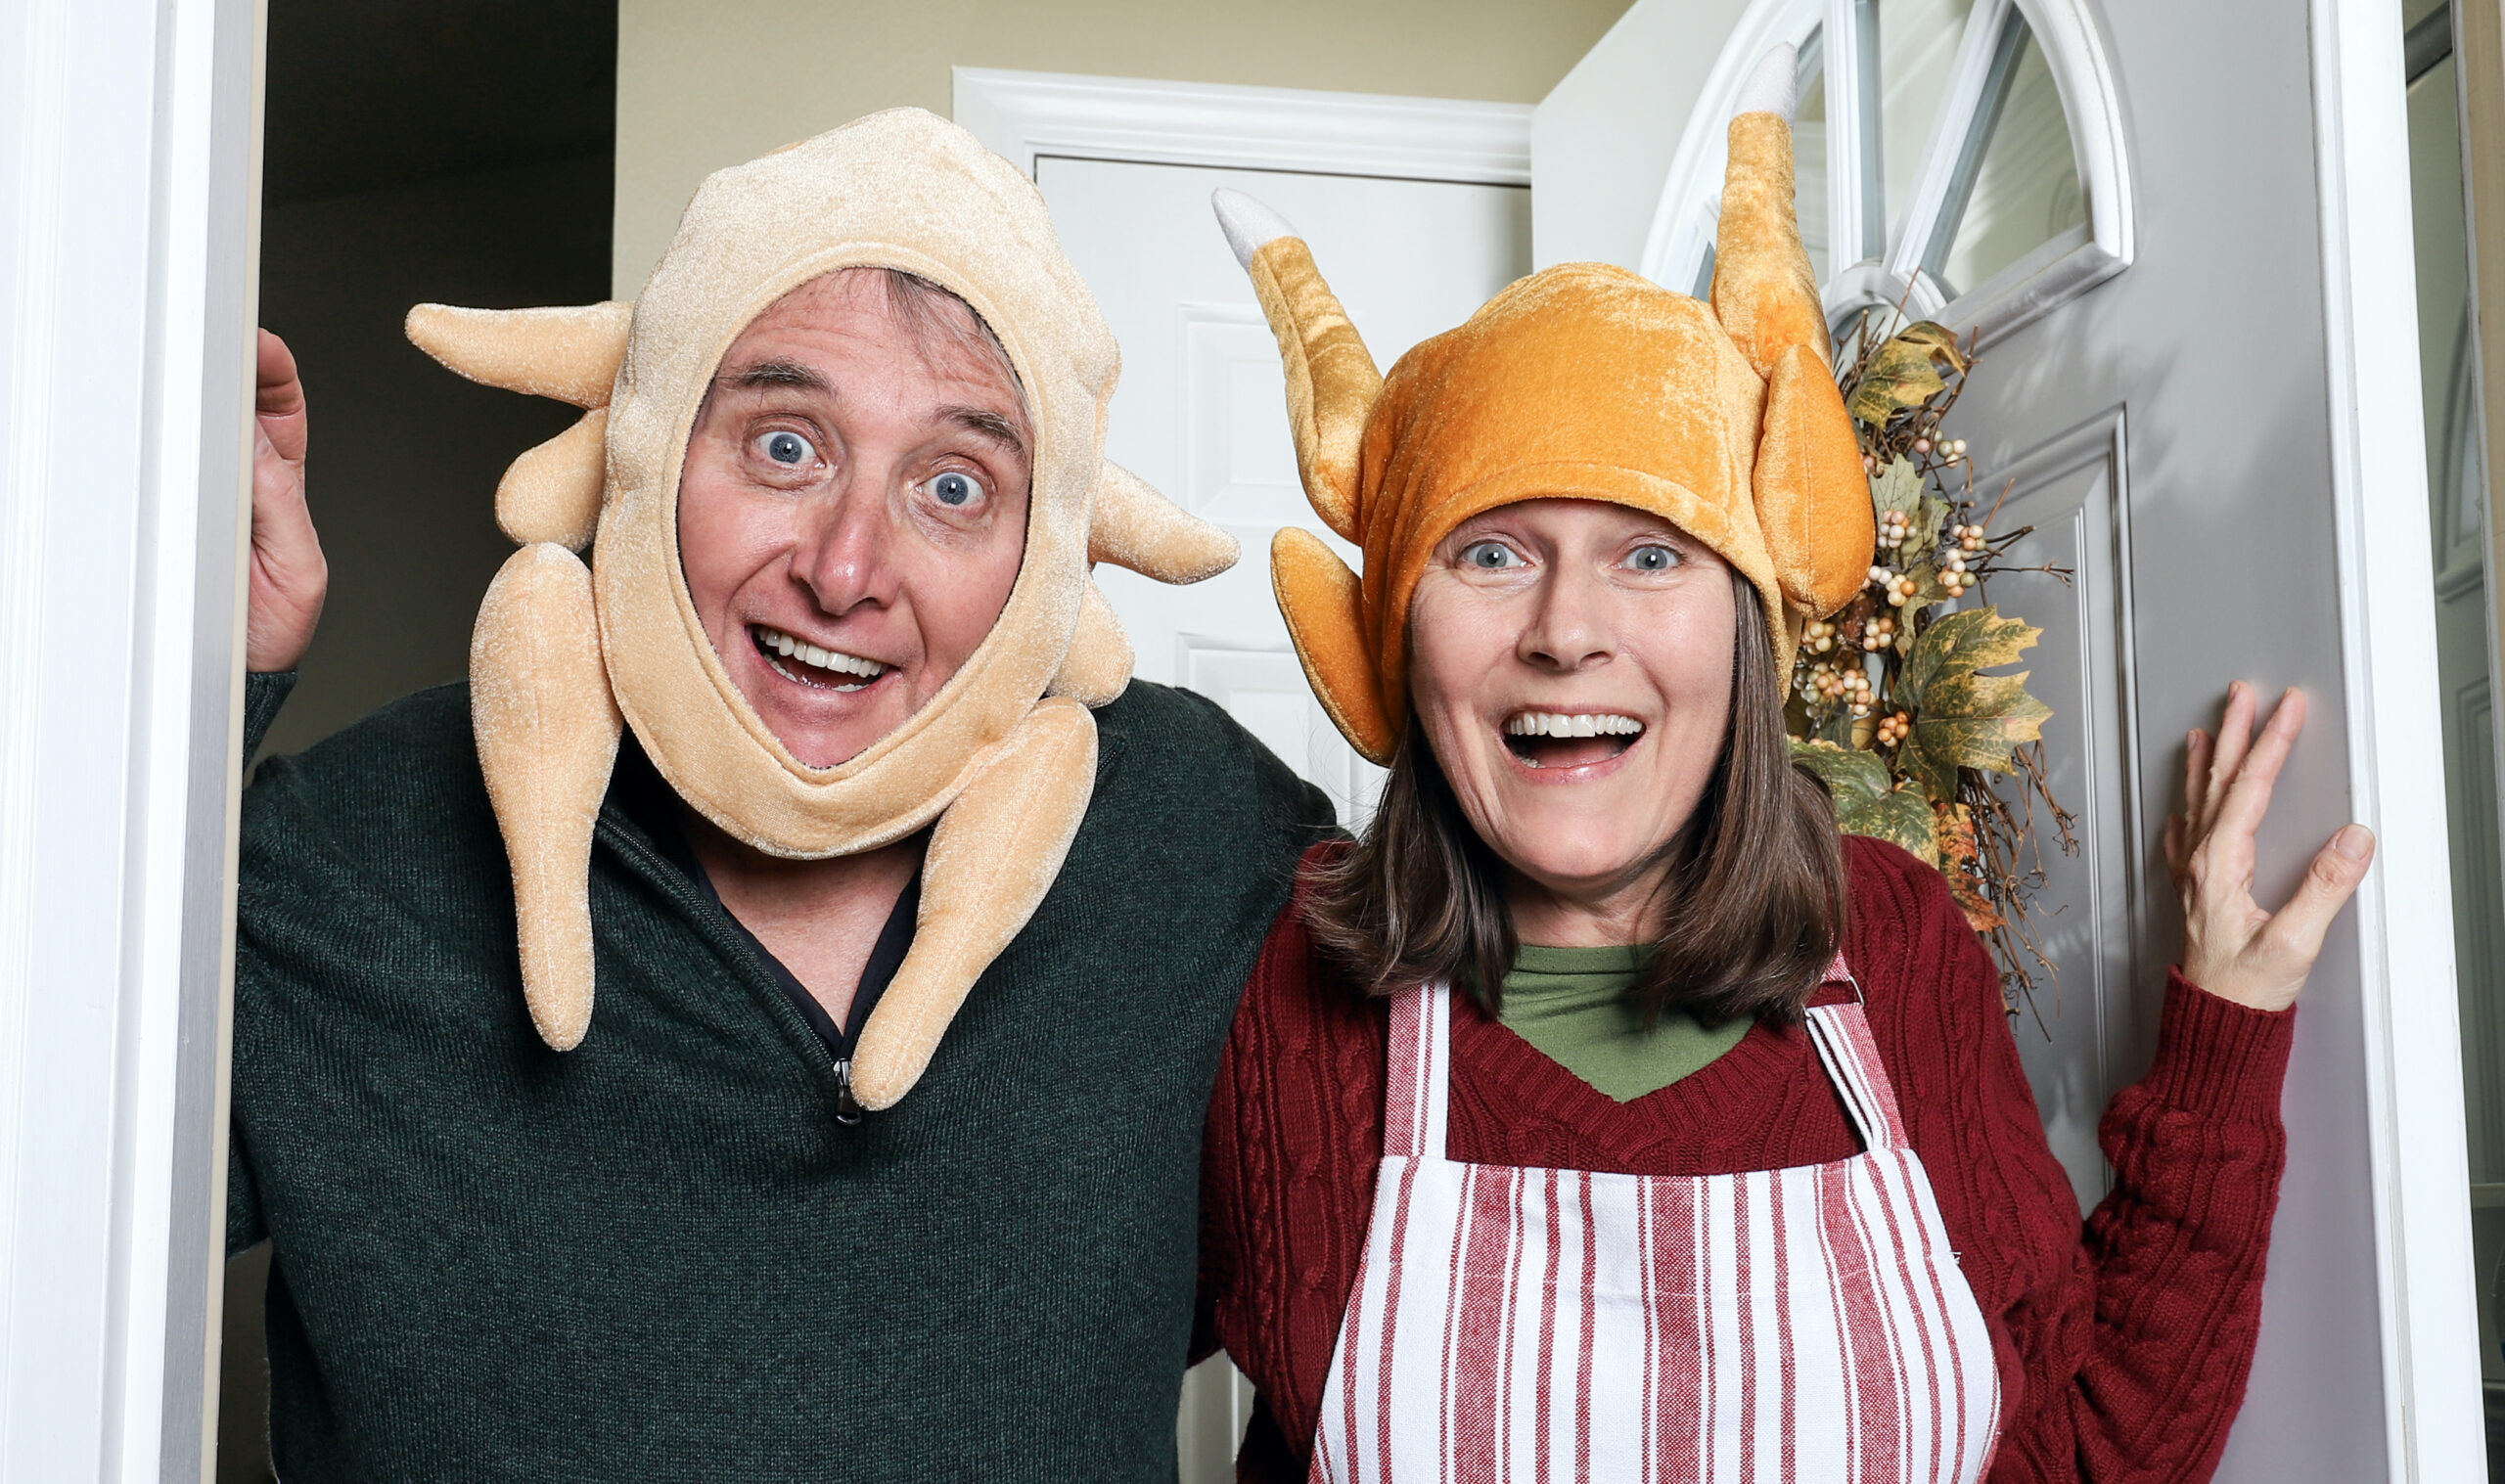 Annoying in laws wearing turkey hats welcoming family on the holiday